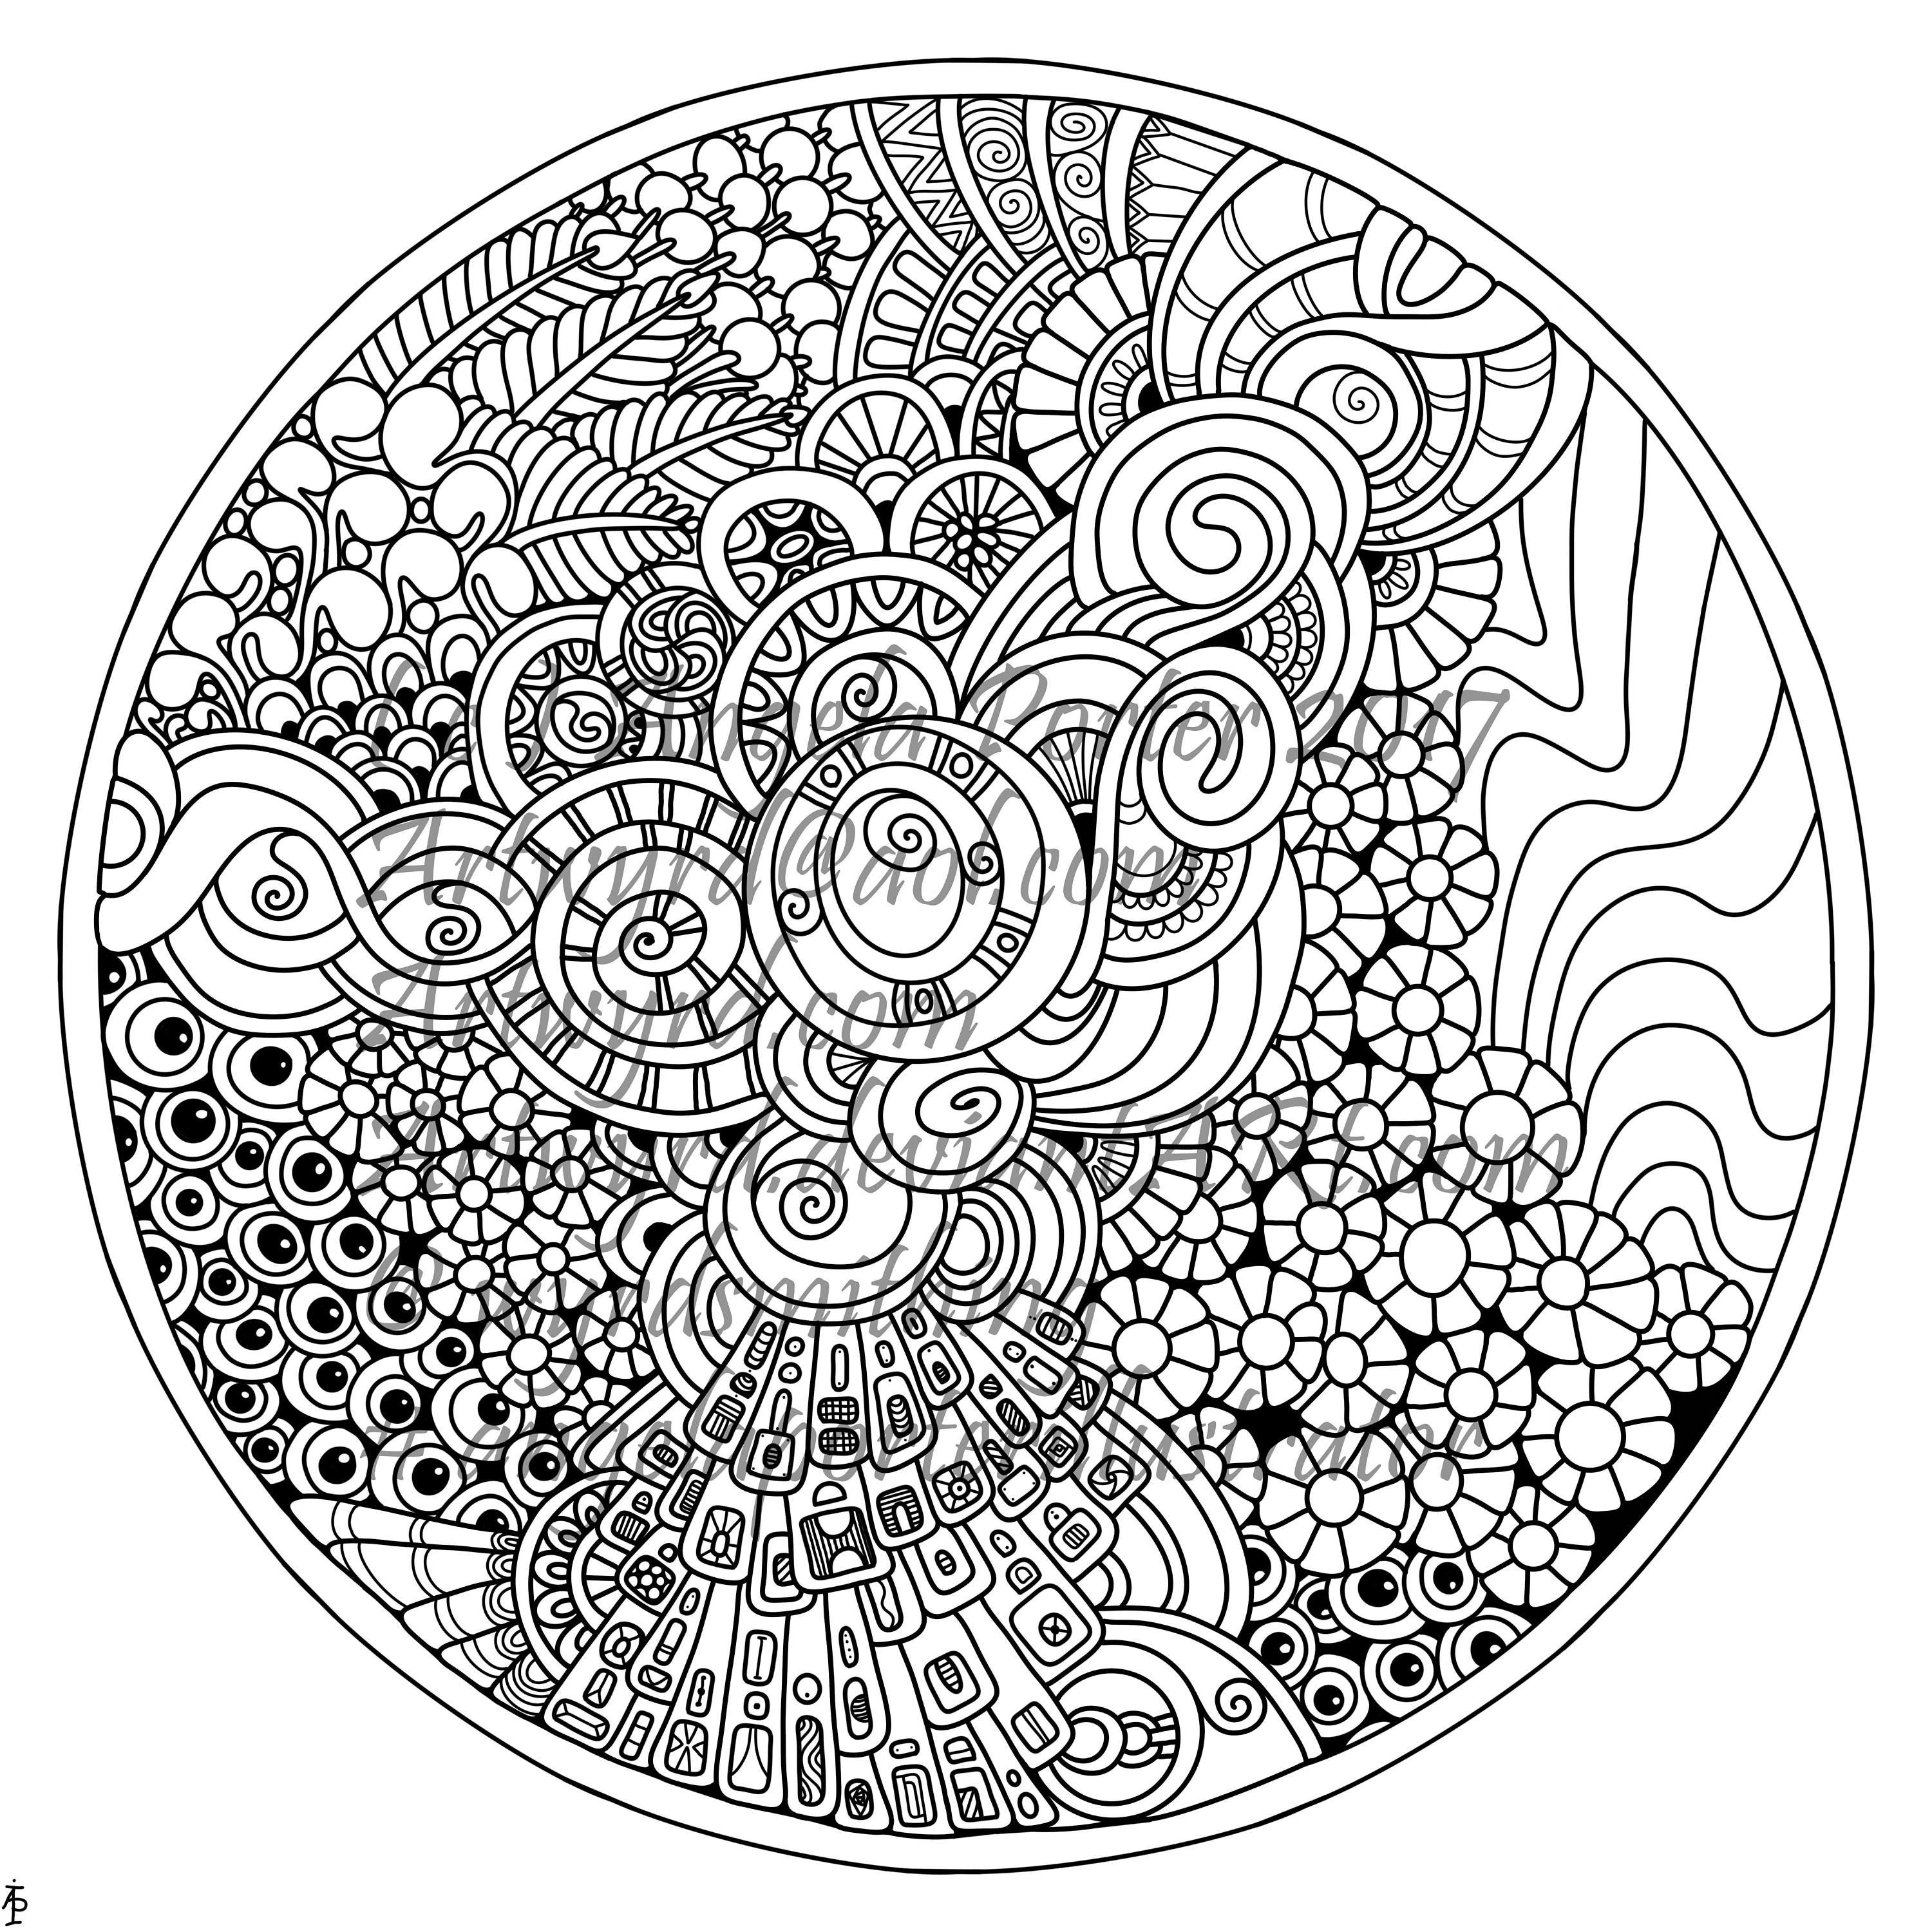 A Winter's Coloring Book For Adults: Winter Mandala Designs High Quality, Crisp and Clean Designs [Book]